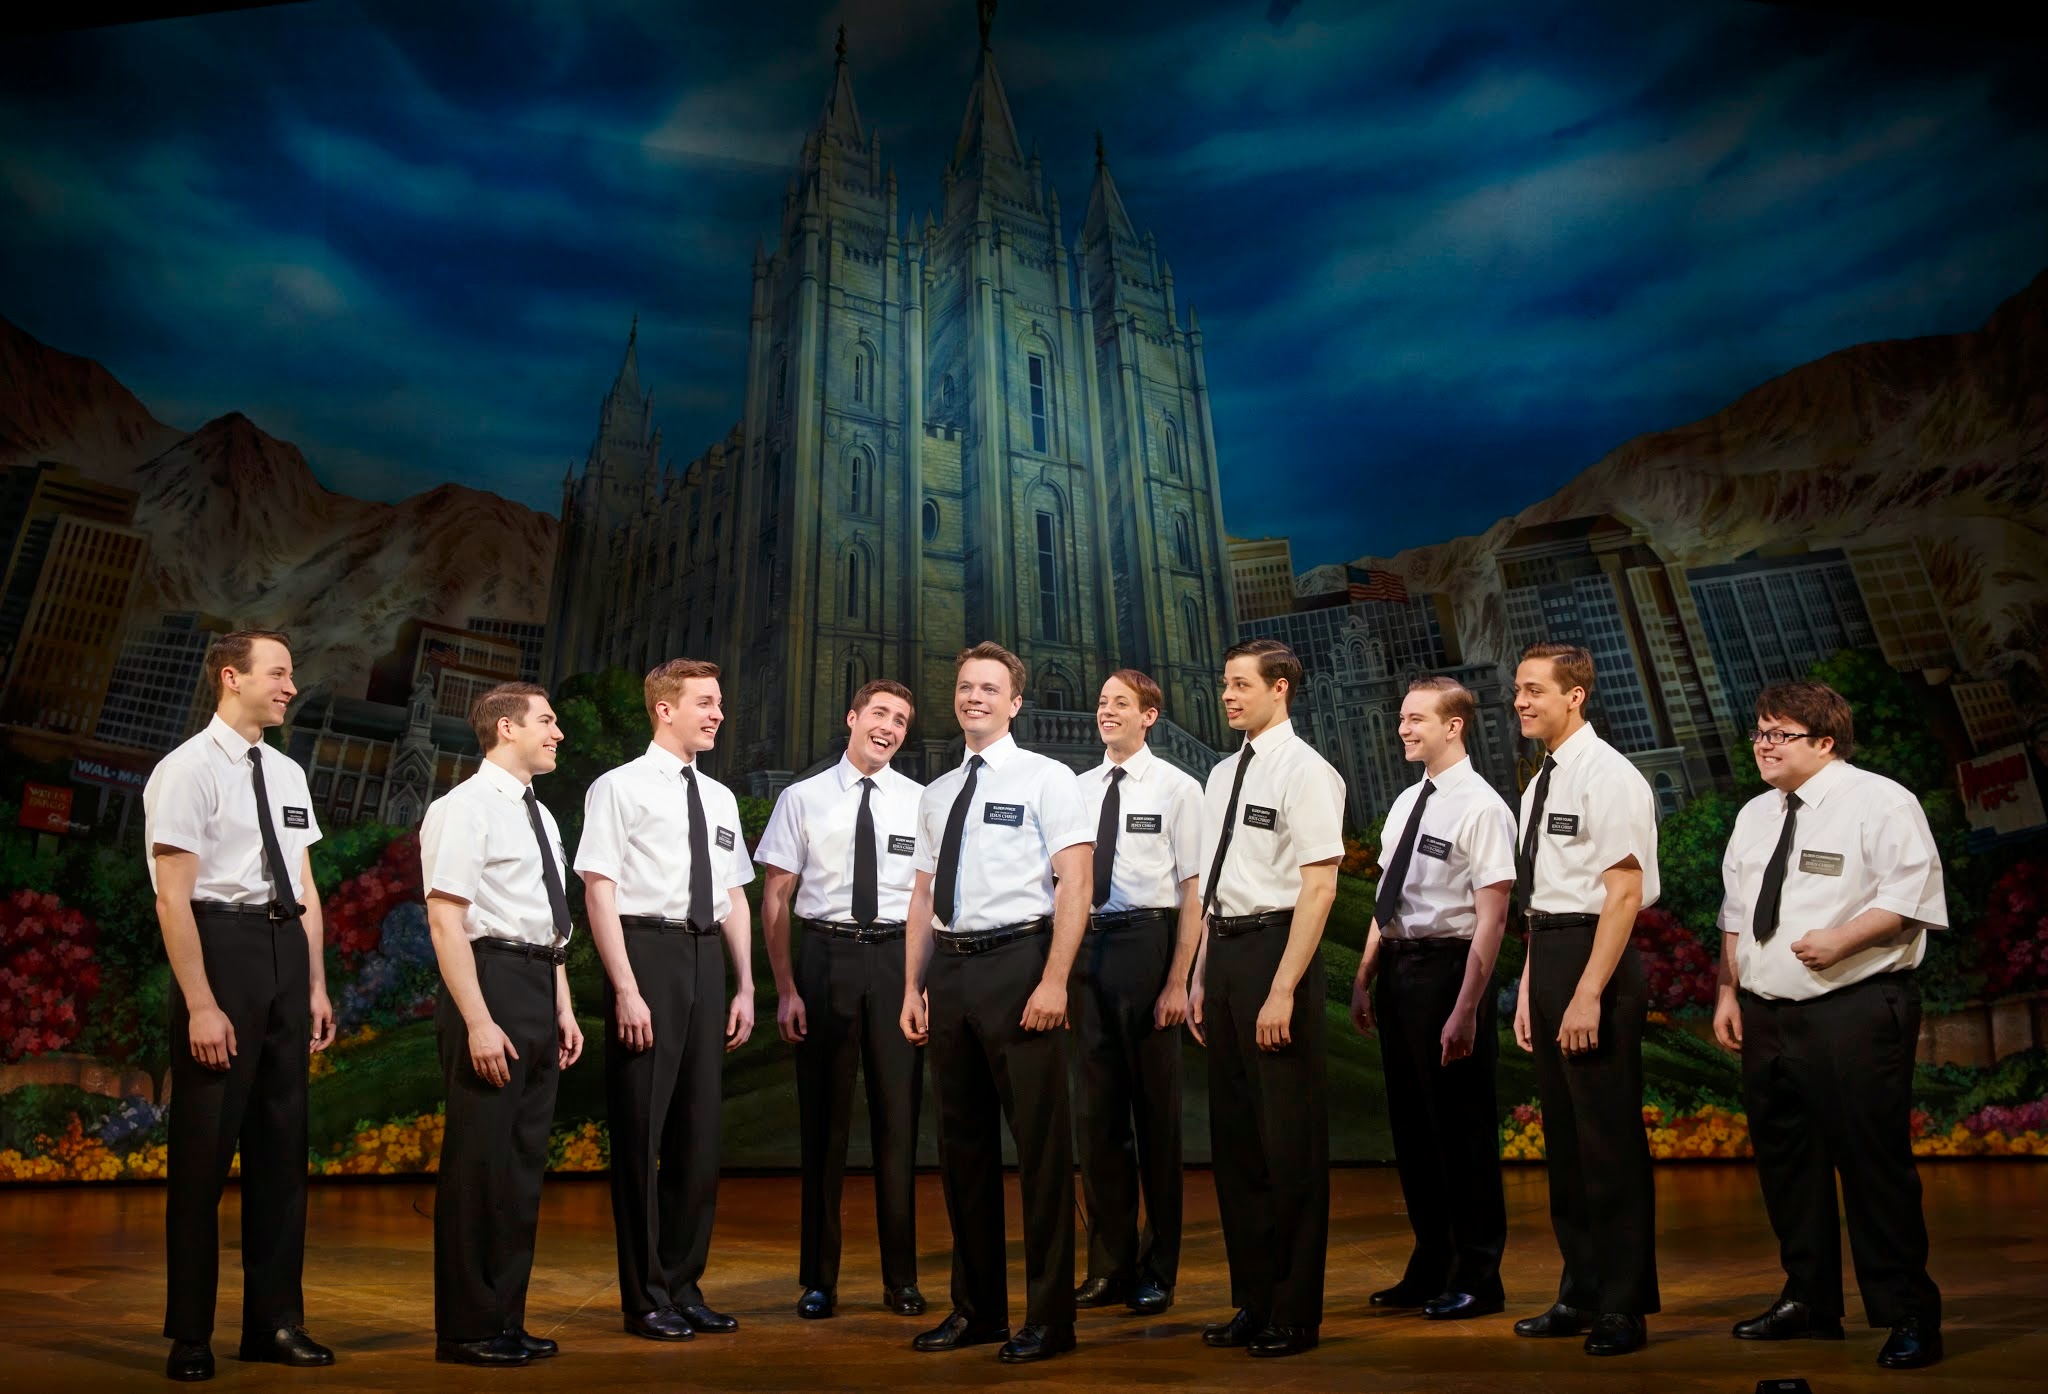 Broadway In Chicago Announces BOOK OF MORMON Tickets Available To Public Sunday, November 16 1 Back by popular demand, THE BOOK OF MORMON, which played a record breaking 43 week run in 2012-2013, returns to Chicago for a limited engagement February 24through May 17, 2015 at Broadway In Chicago’s Bank of America Theatre (18 W Monroe).  THE BOOK OF MORMON holds the record for the largest weekly gross in the history of the Bank of America Theatre and played to over 100% capacity during its 2012-2013 engagement.